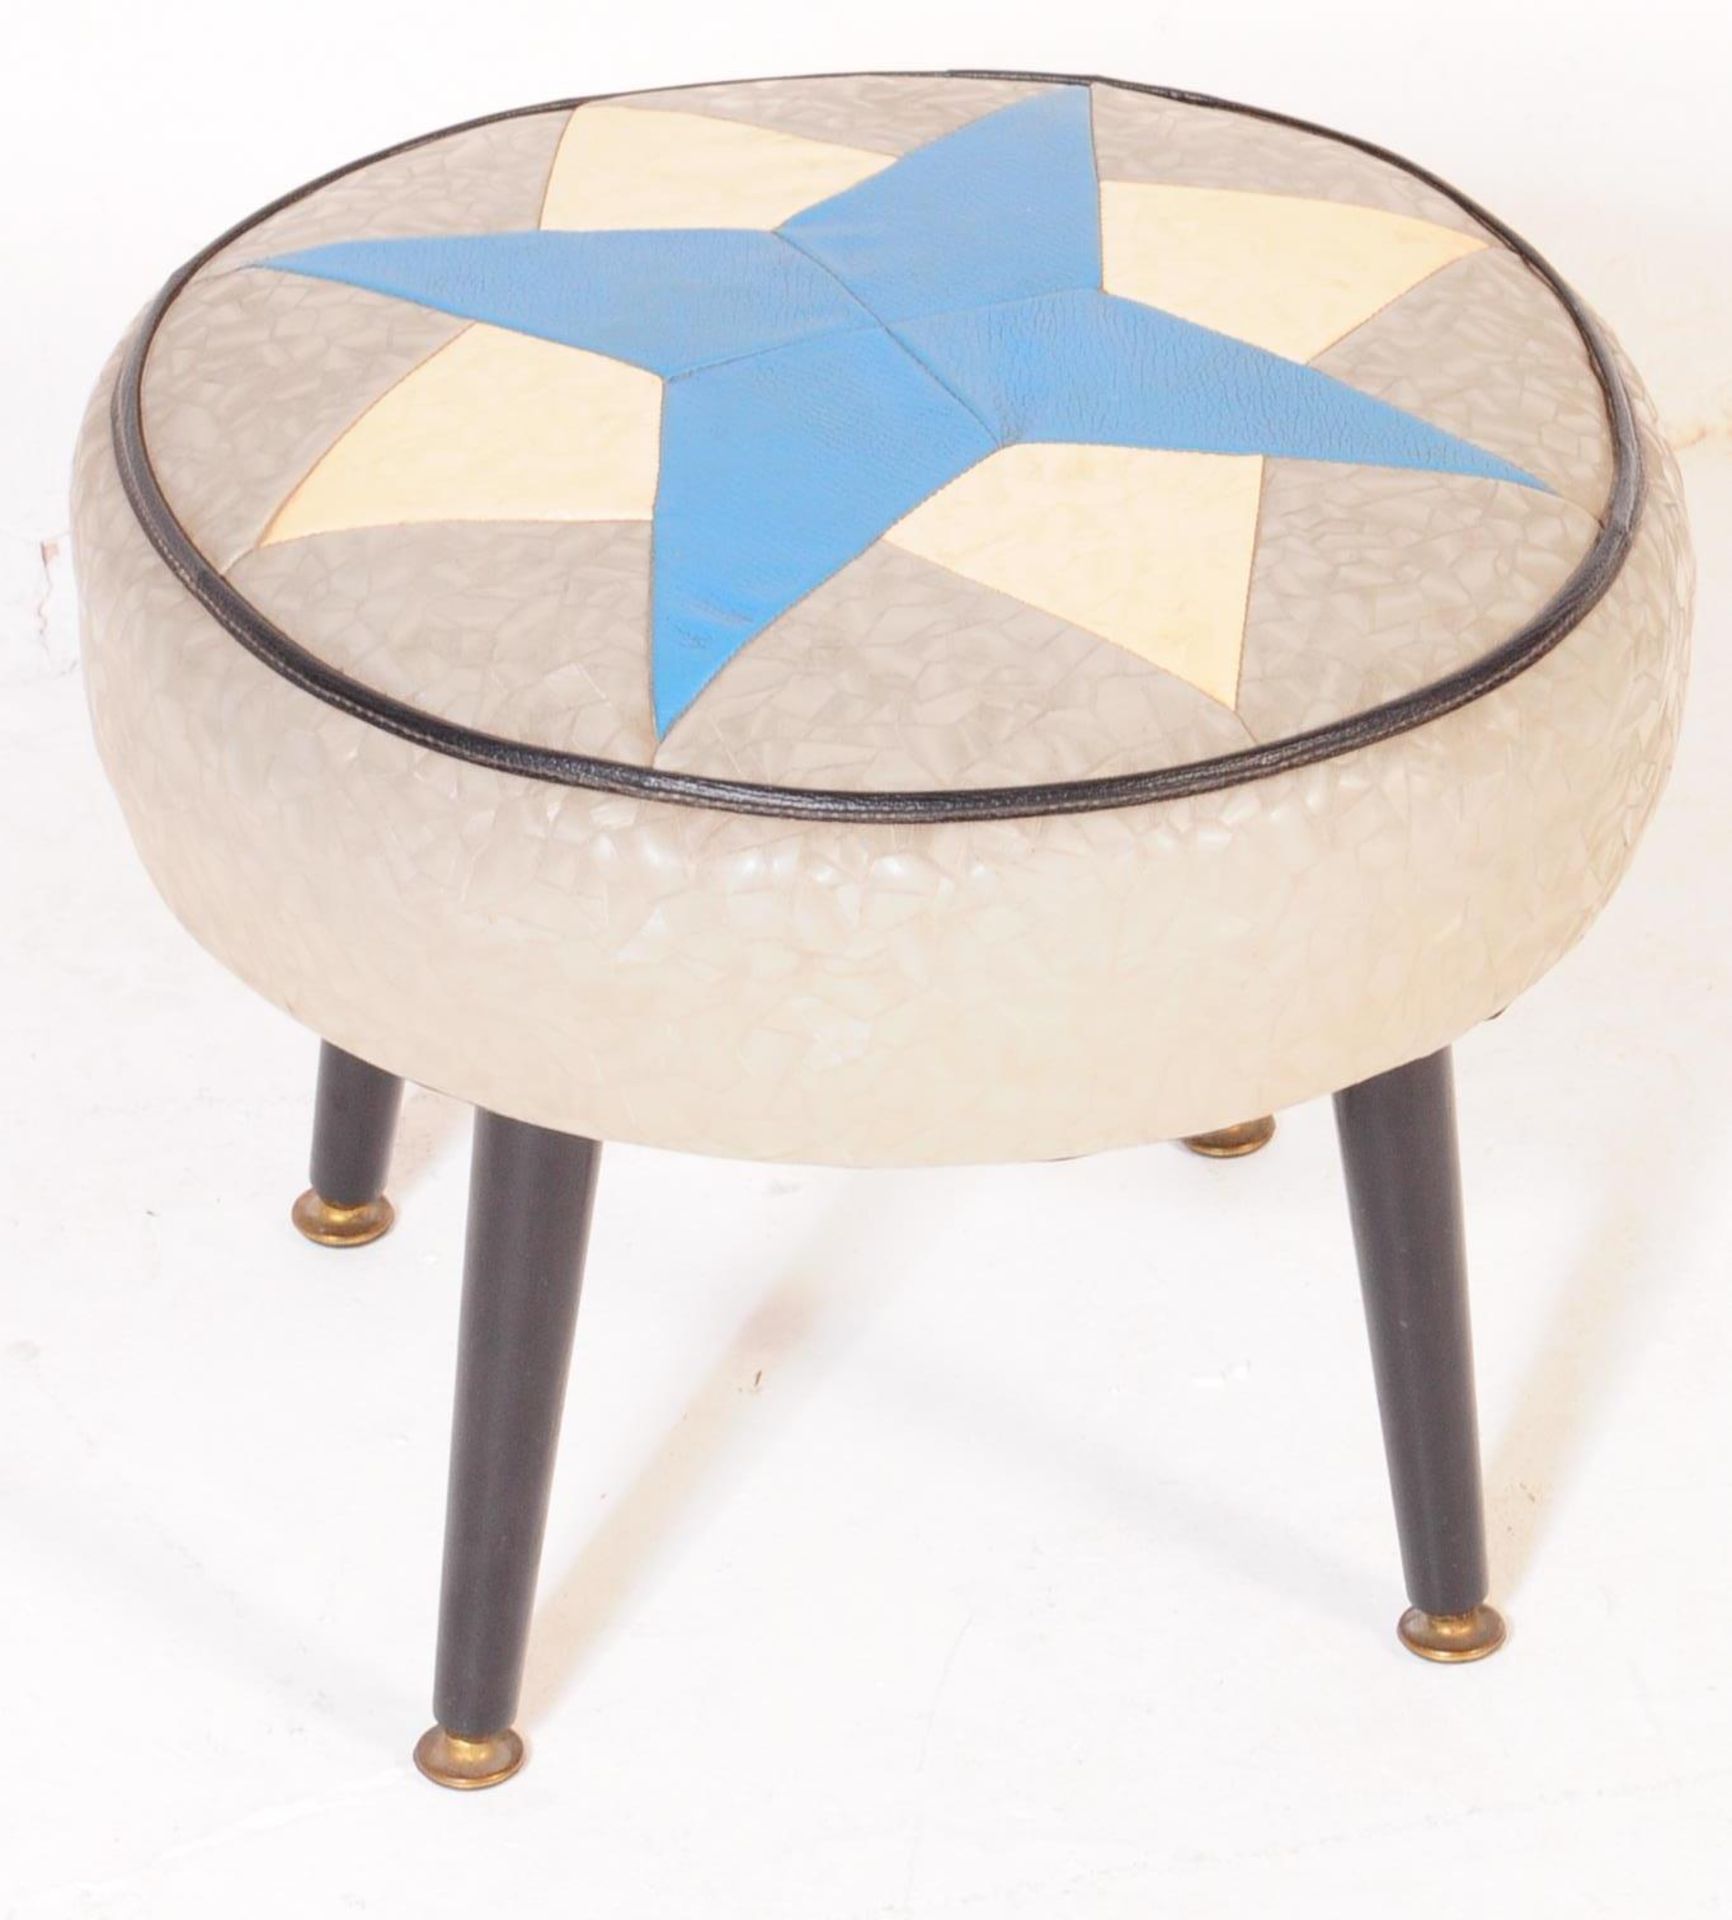 A VINTAGE RETRO 1970'S VINYL POUF FOOT STOOL BY SHERBOURNE - Image 2 of 4